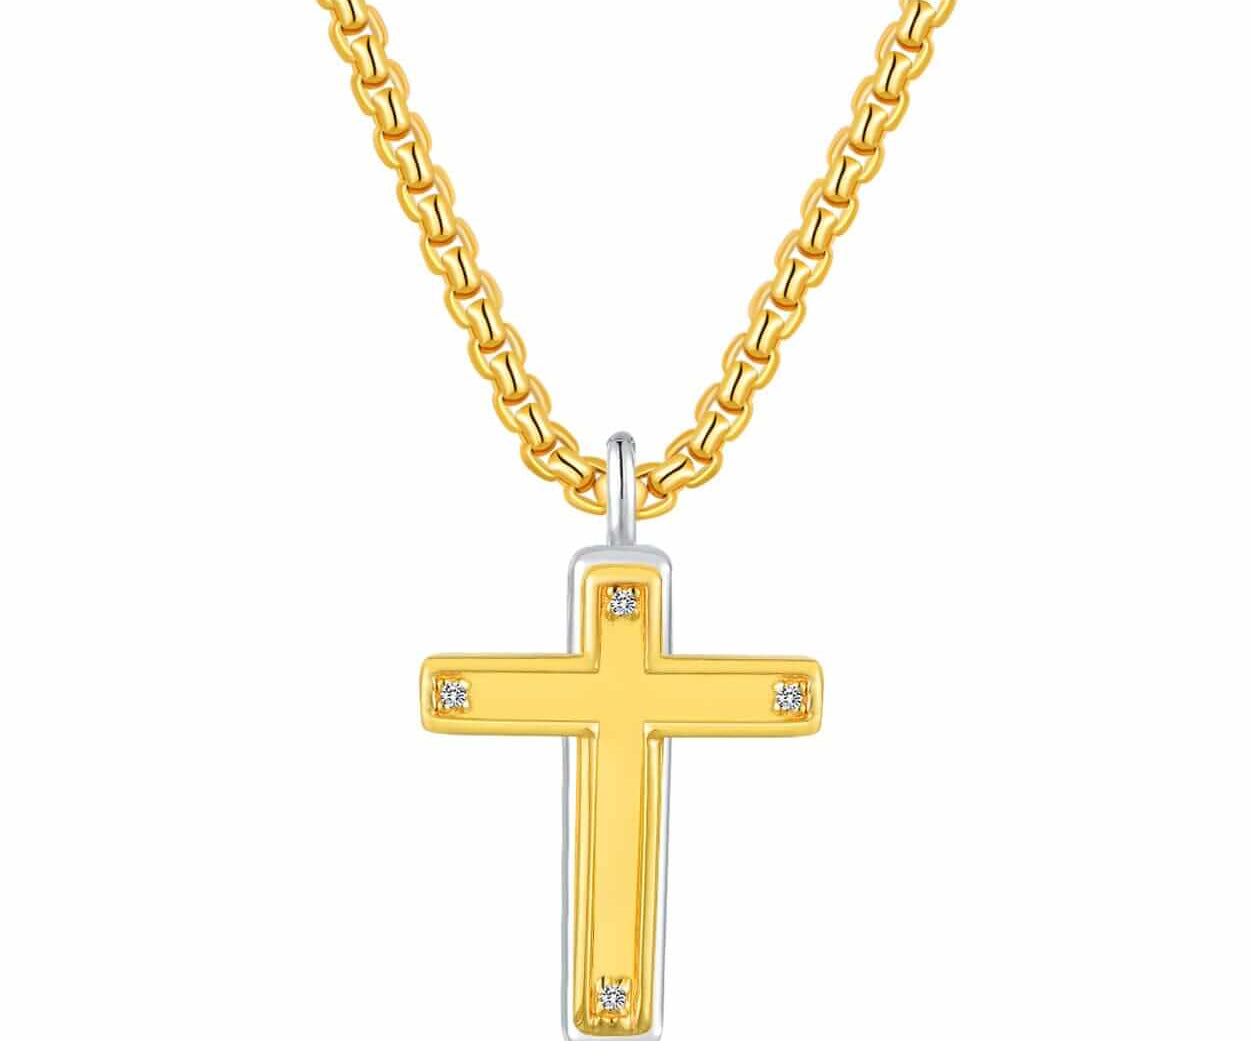 Mens Cross NecklaceHandcrafted Fine Jewelry